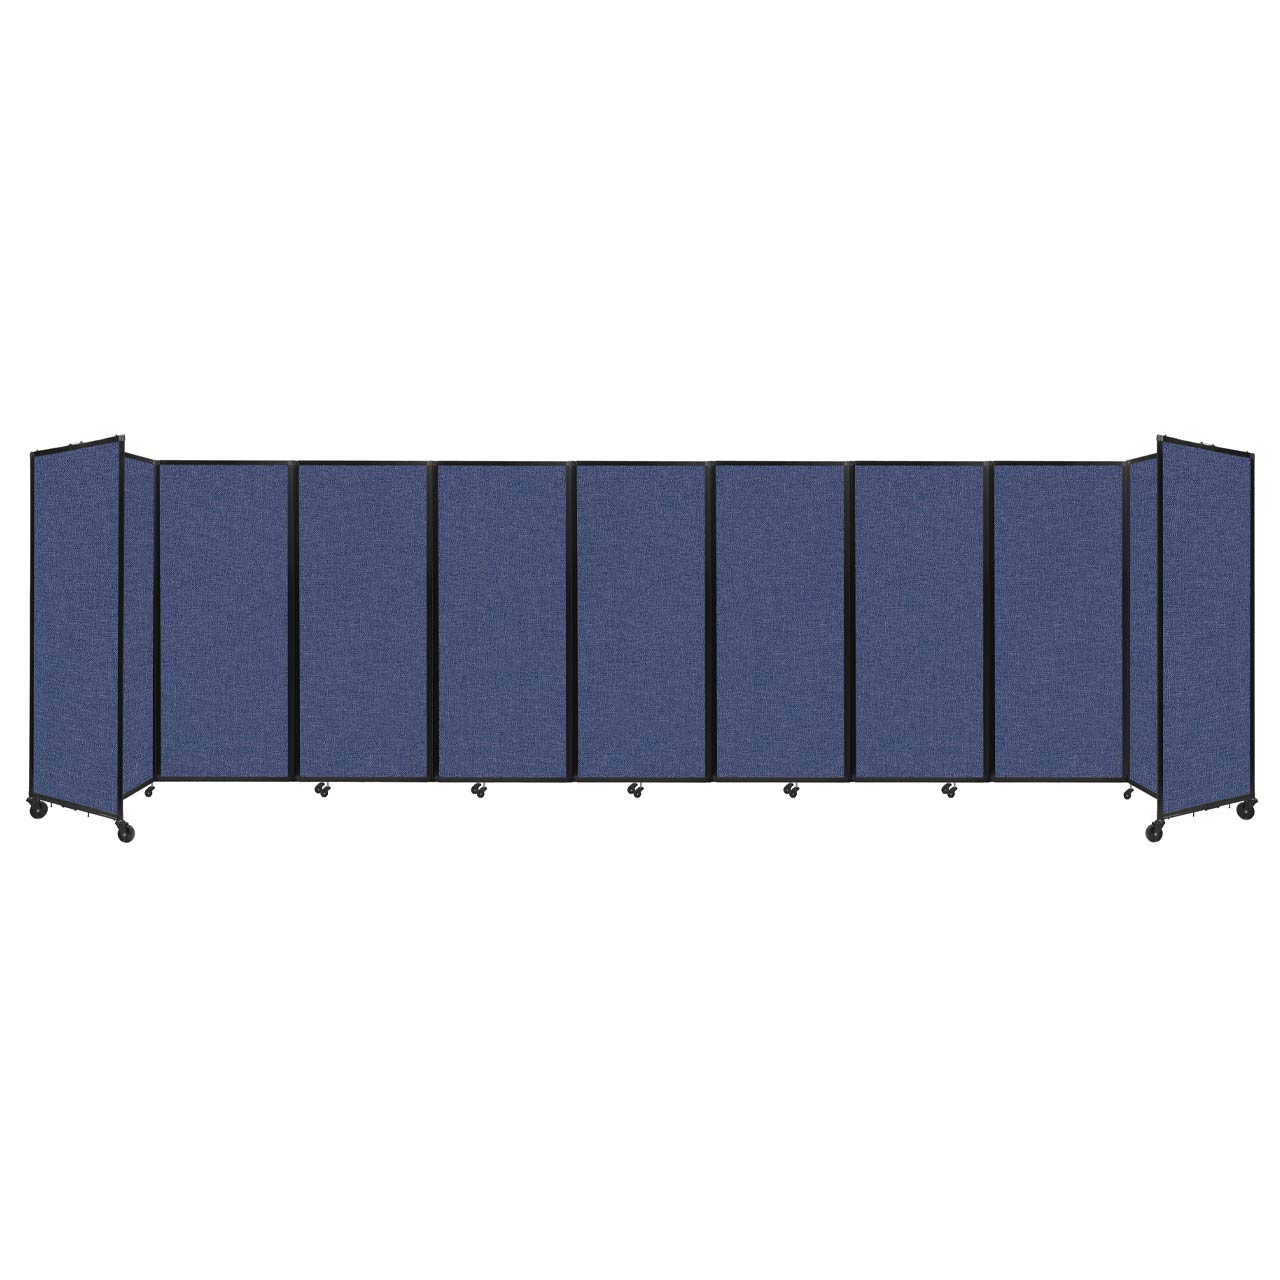 Room Divider 360° Folding Portable Partition with Acoustical Fabric Panels, 25' W x 6' 10" H